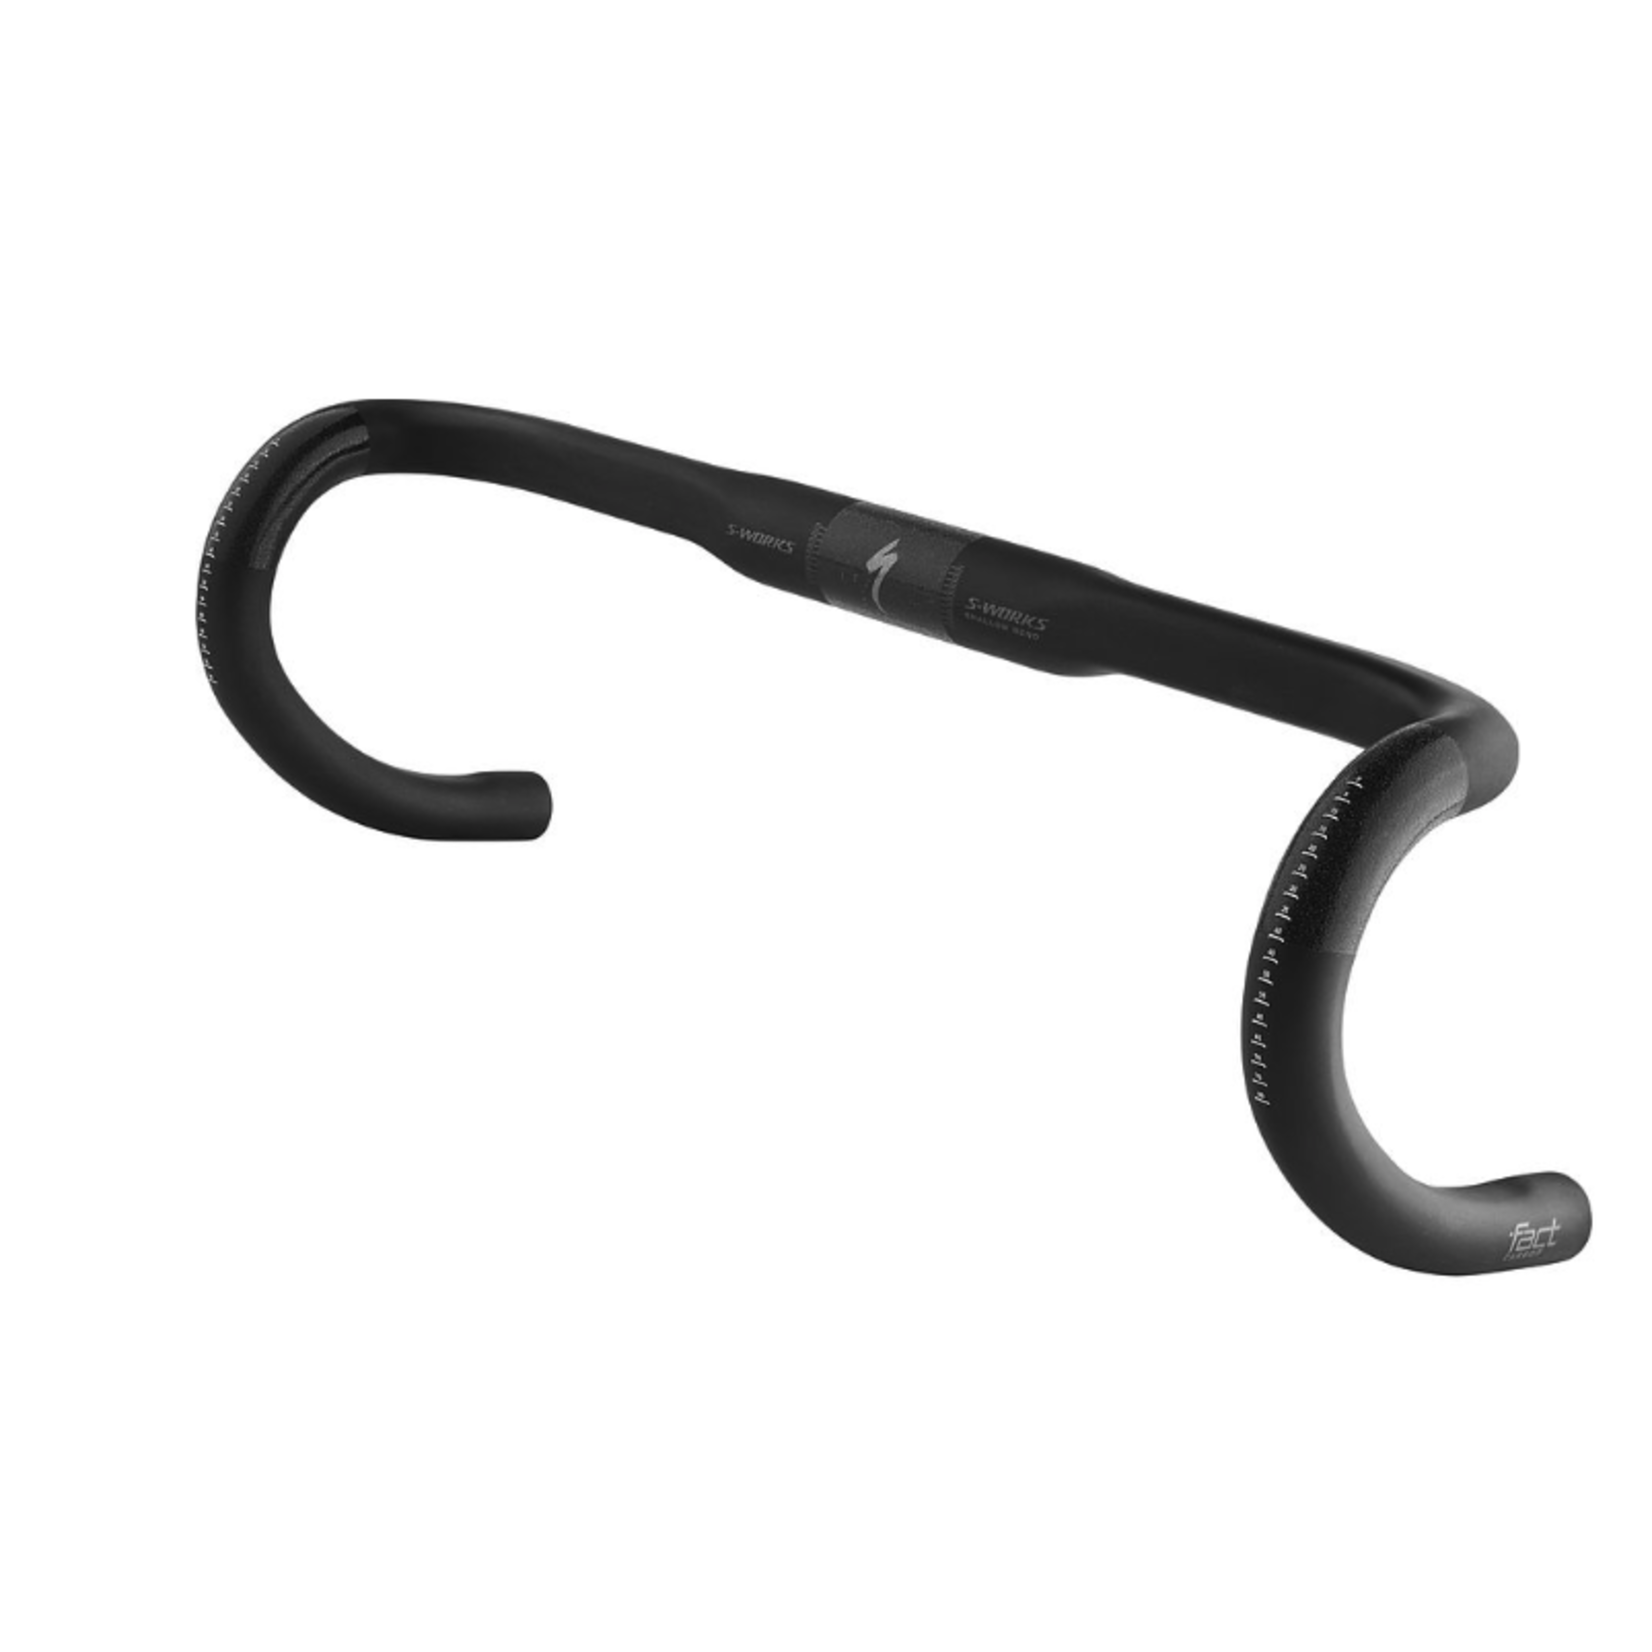 SPECIALIZED SPECIALIZED S-WORKS SHALLOW BEND CARBON HANDLEBARS